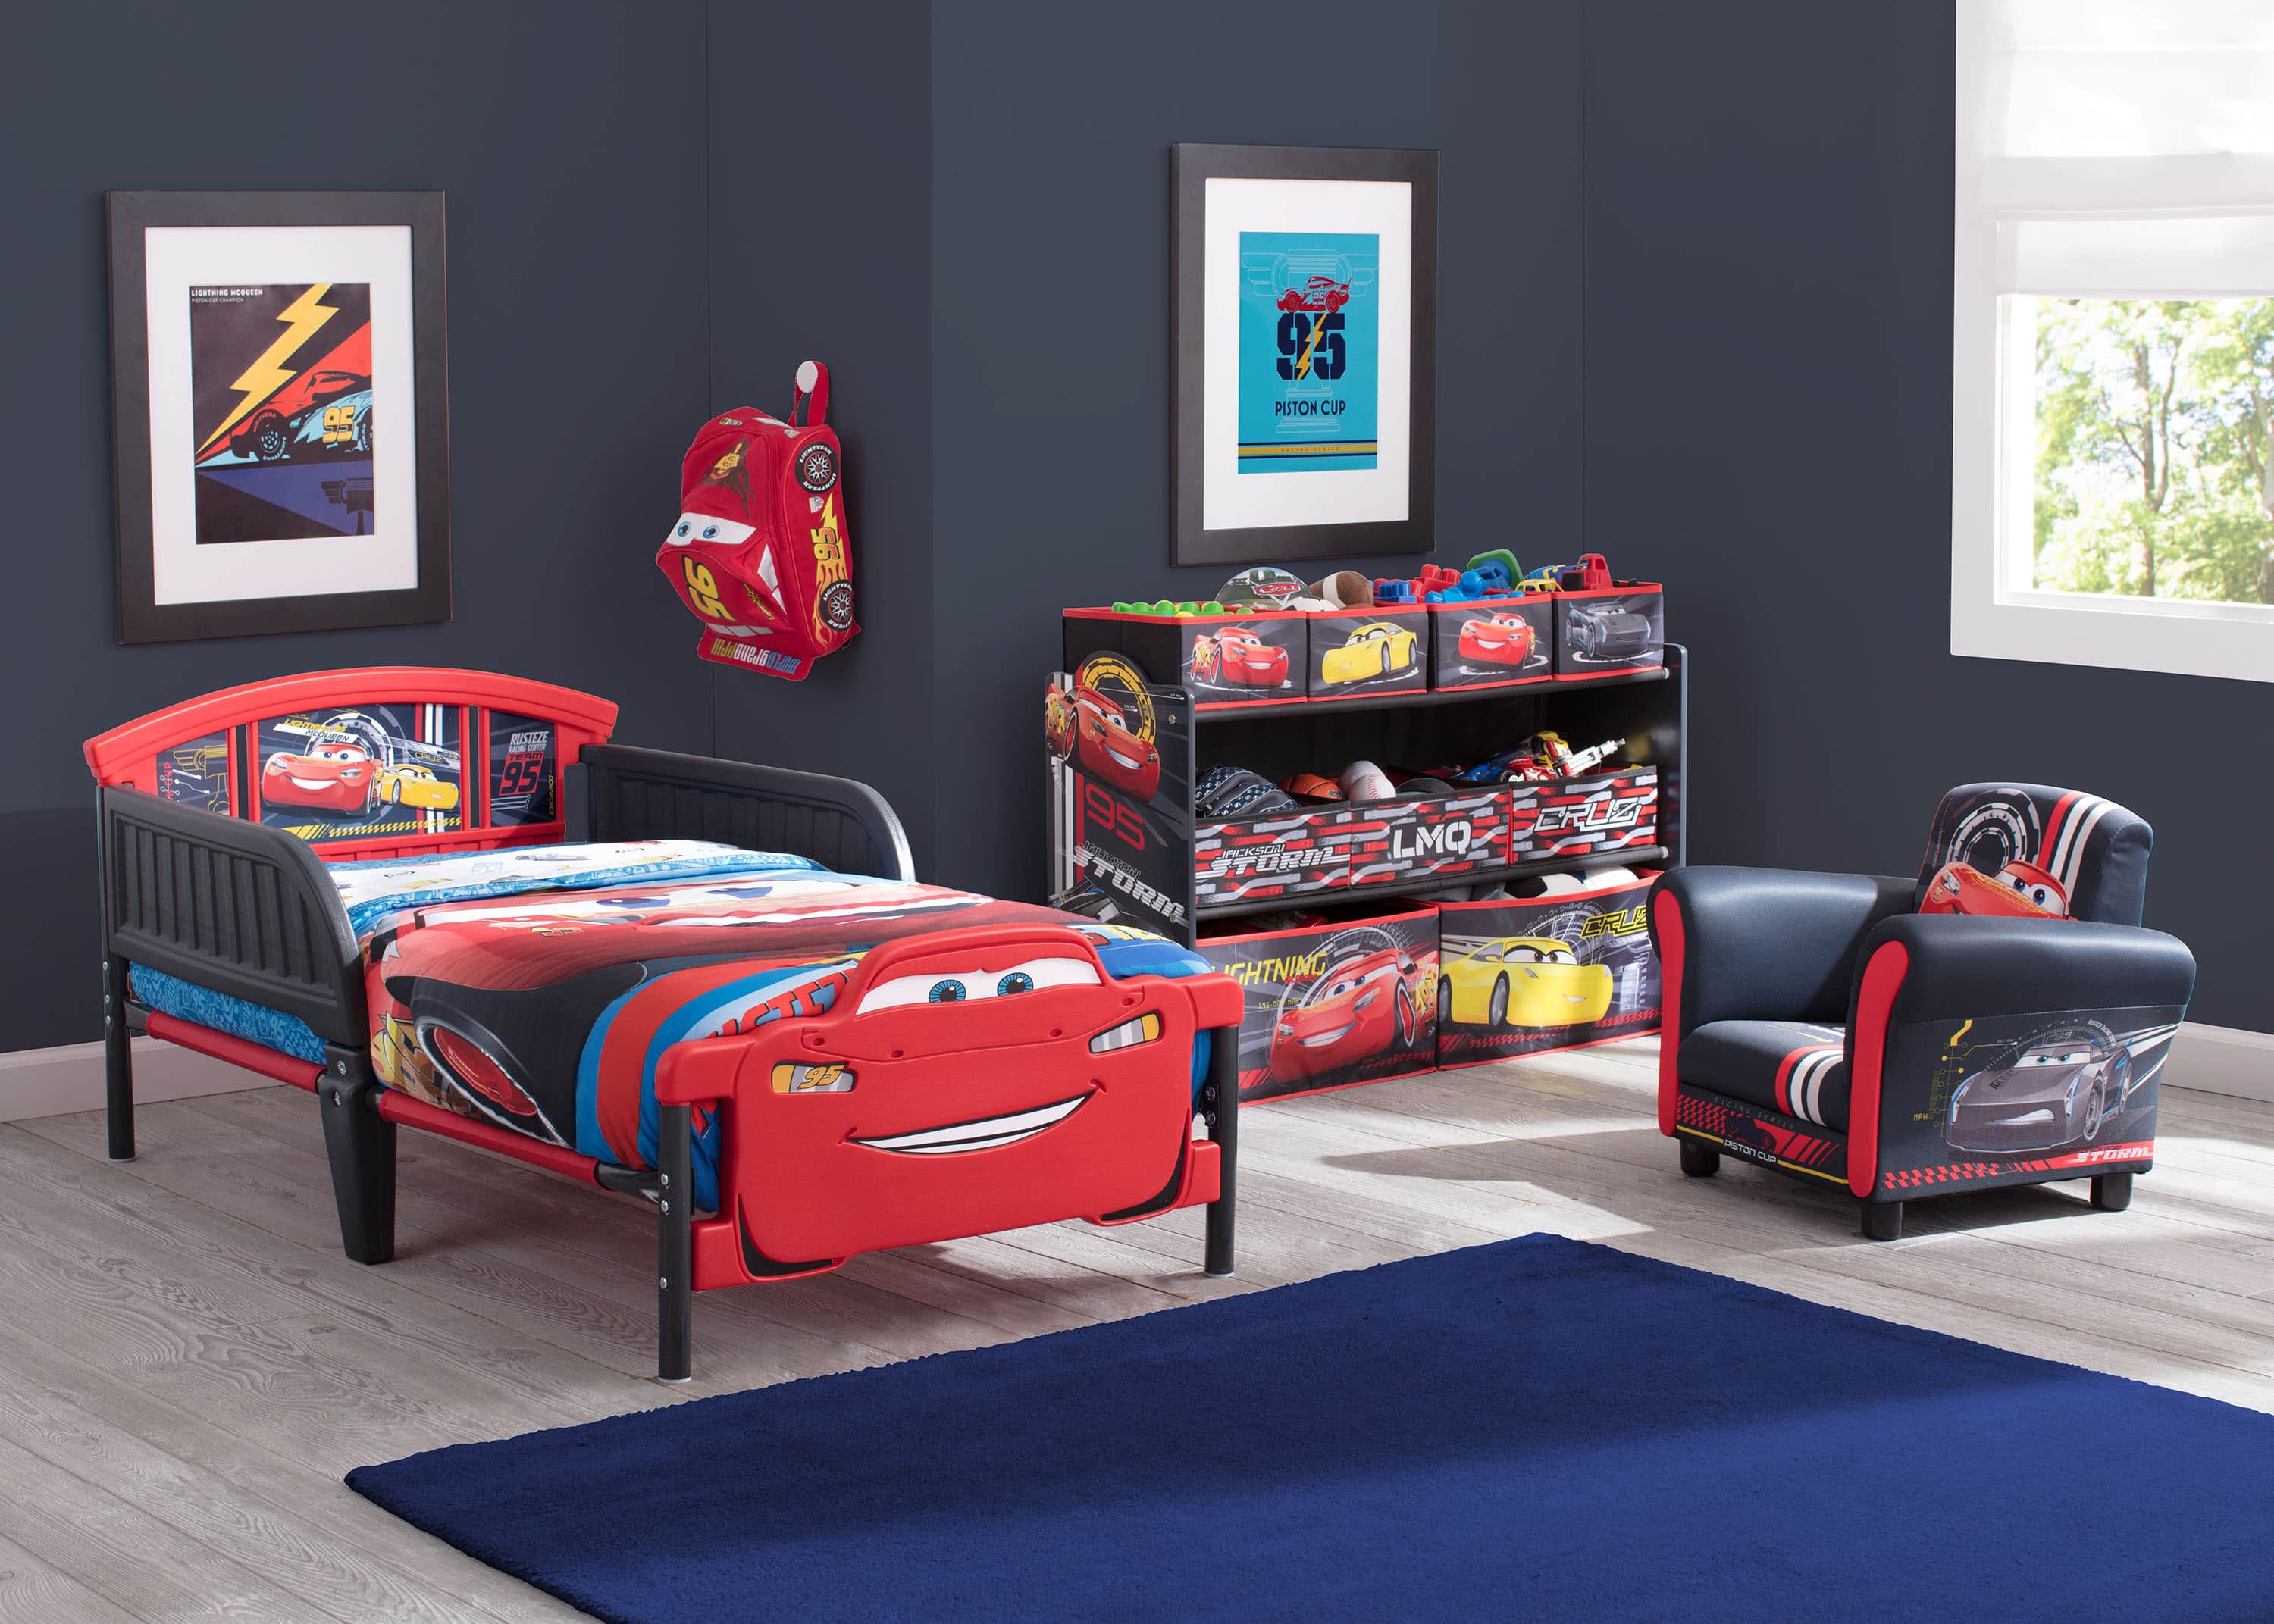 Cars 3D Footboard Toddler Bed